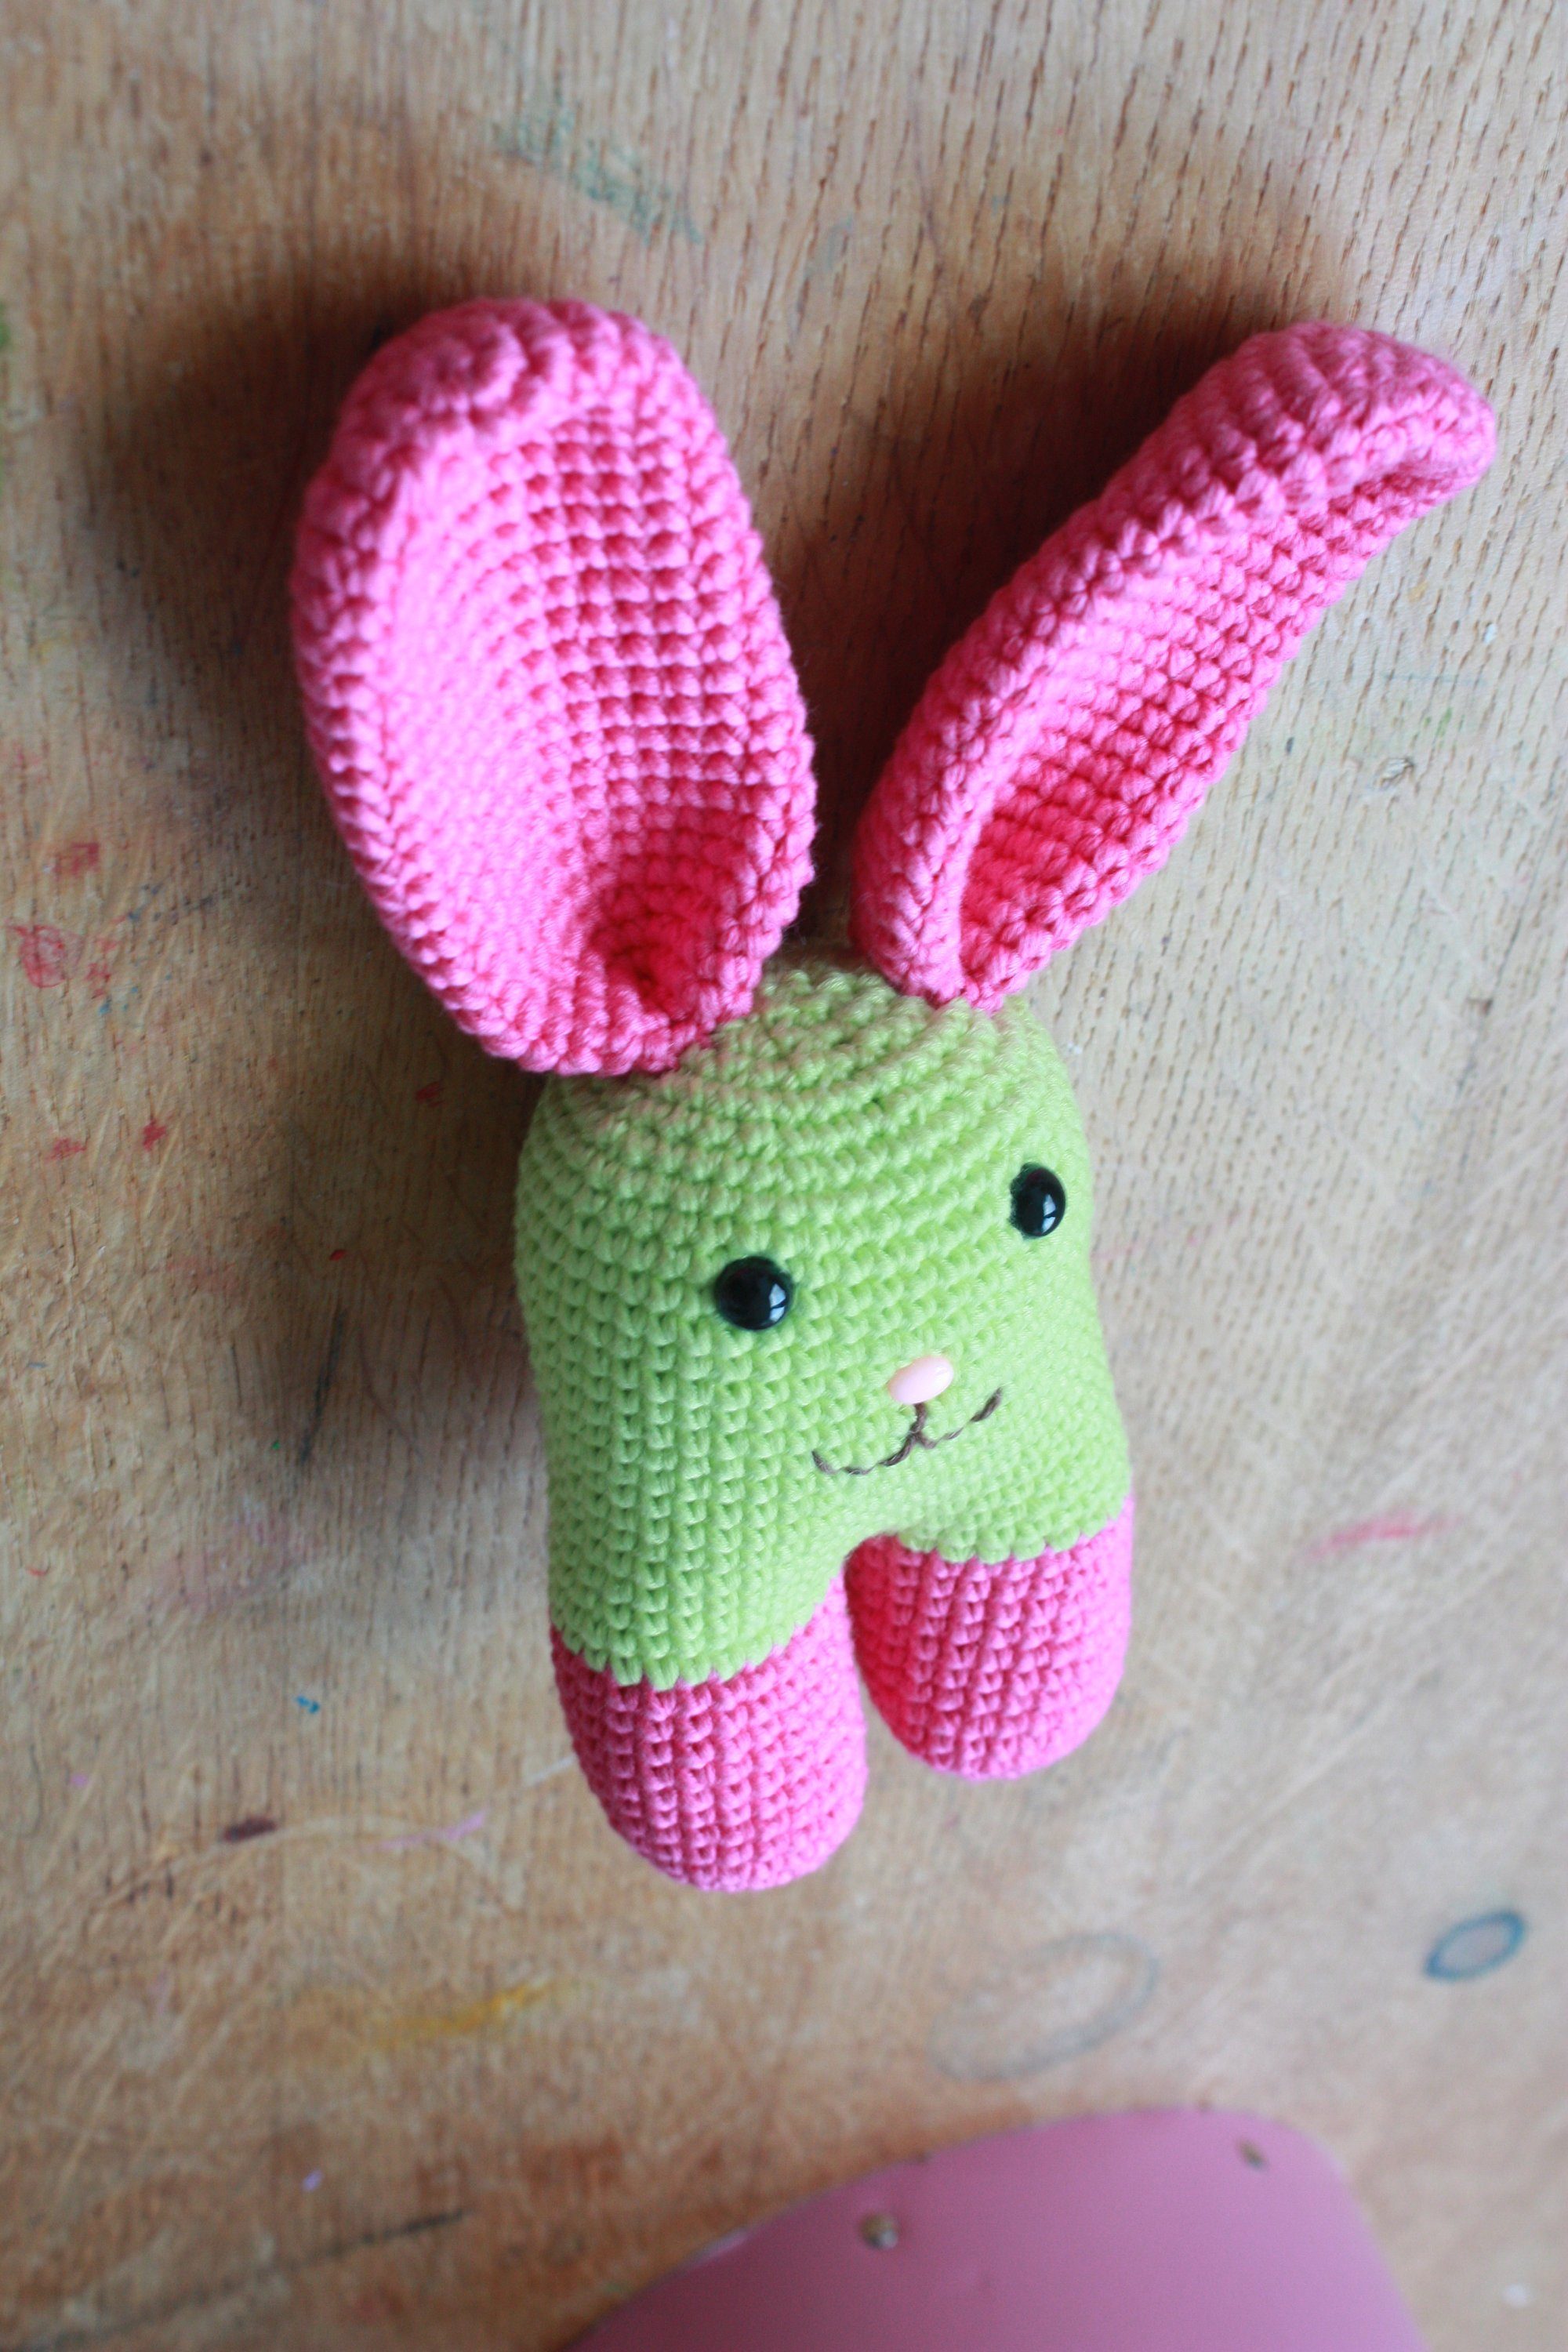 Crochet Bunny Pattern Easy Easy Bunny Pattern To Crochet Perfect Toy To Kids Nurseries Etsy